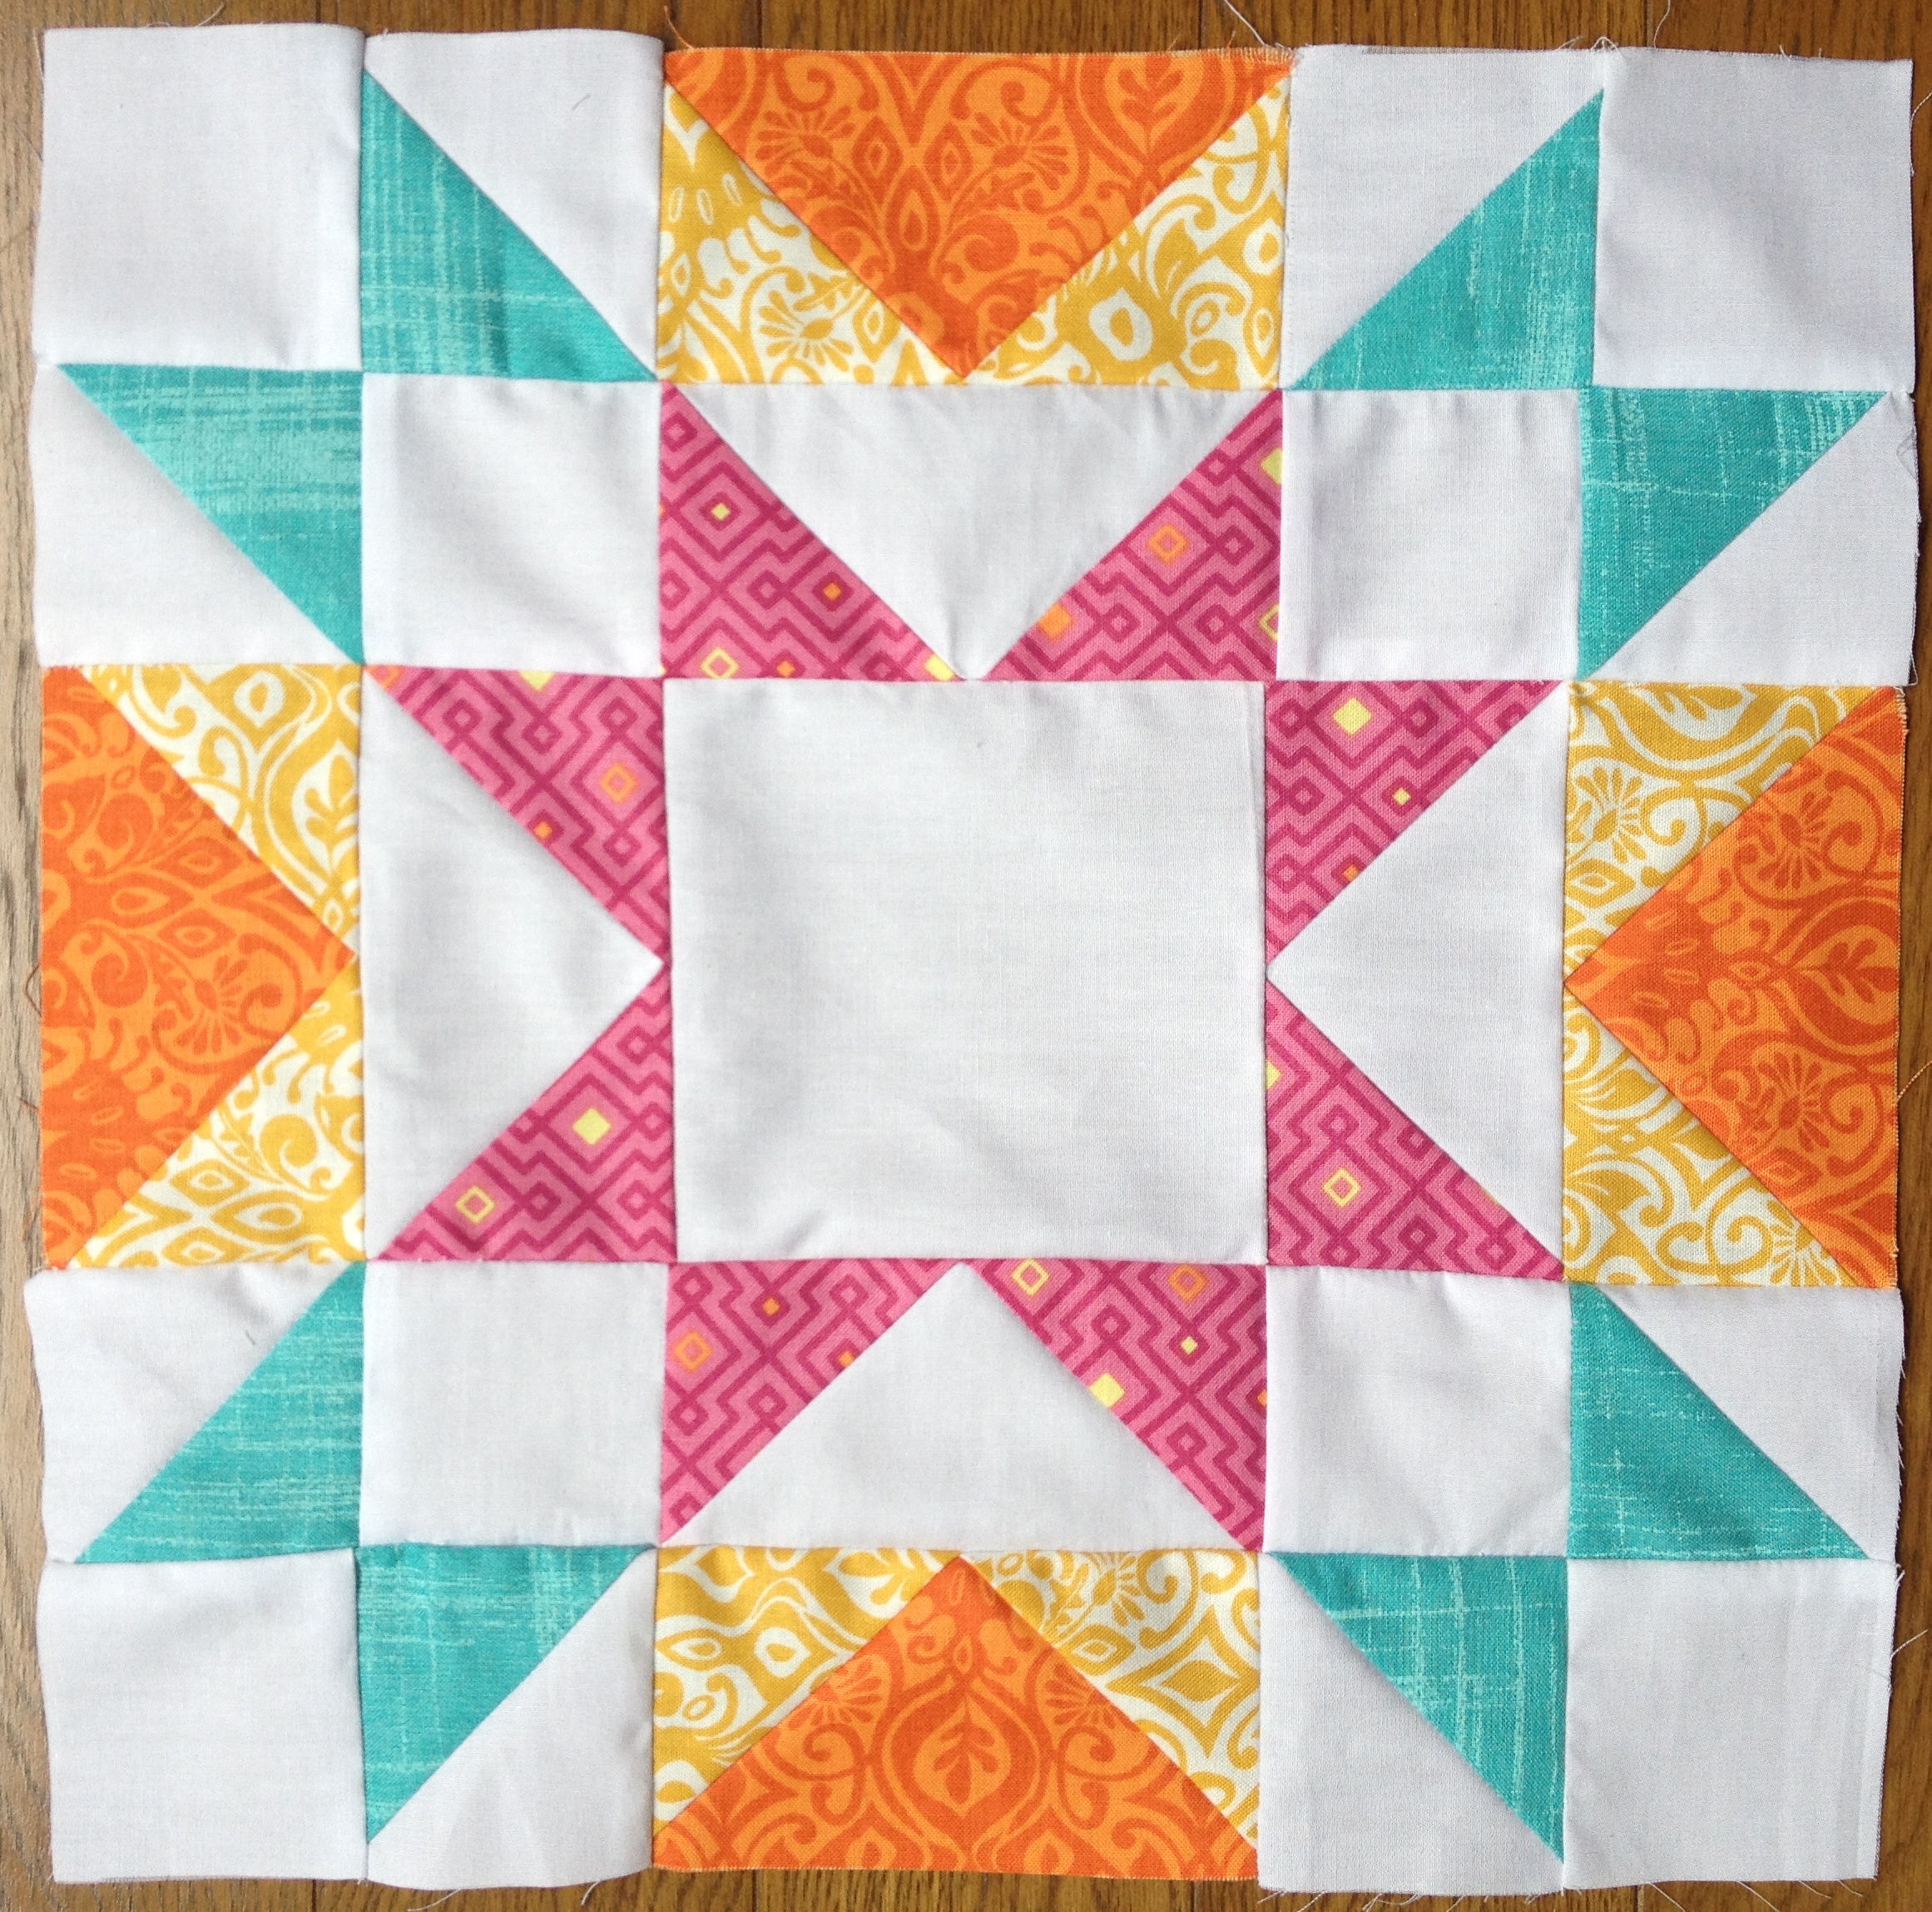 Quiltmaker’s 100 Blocks Blog Tour and Giveaway